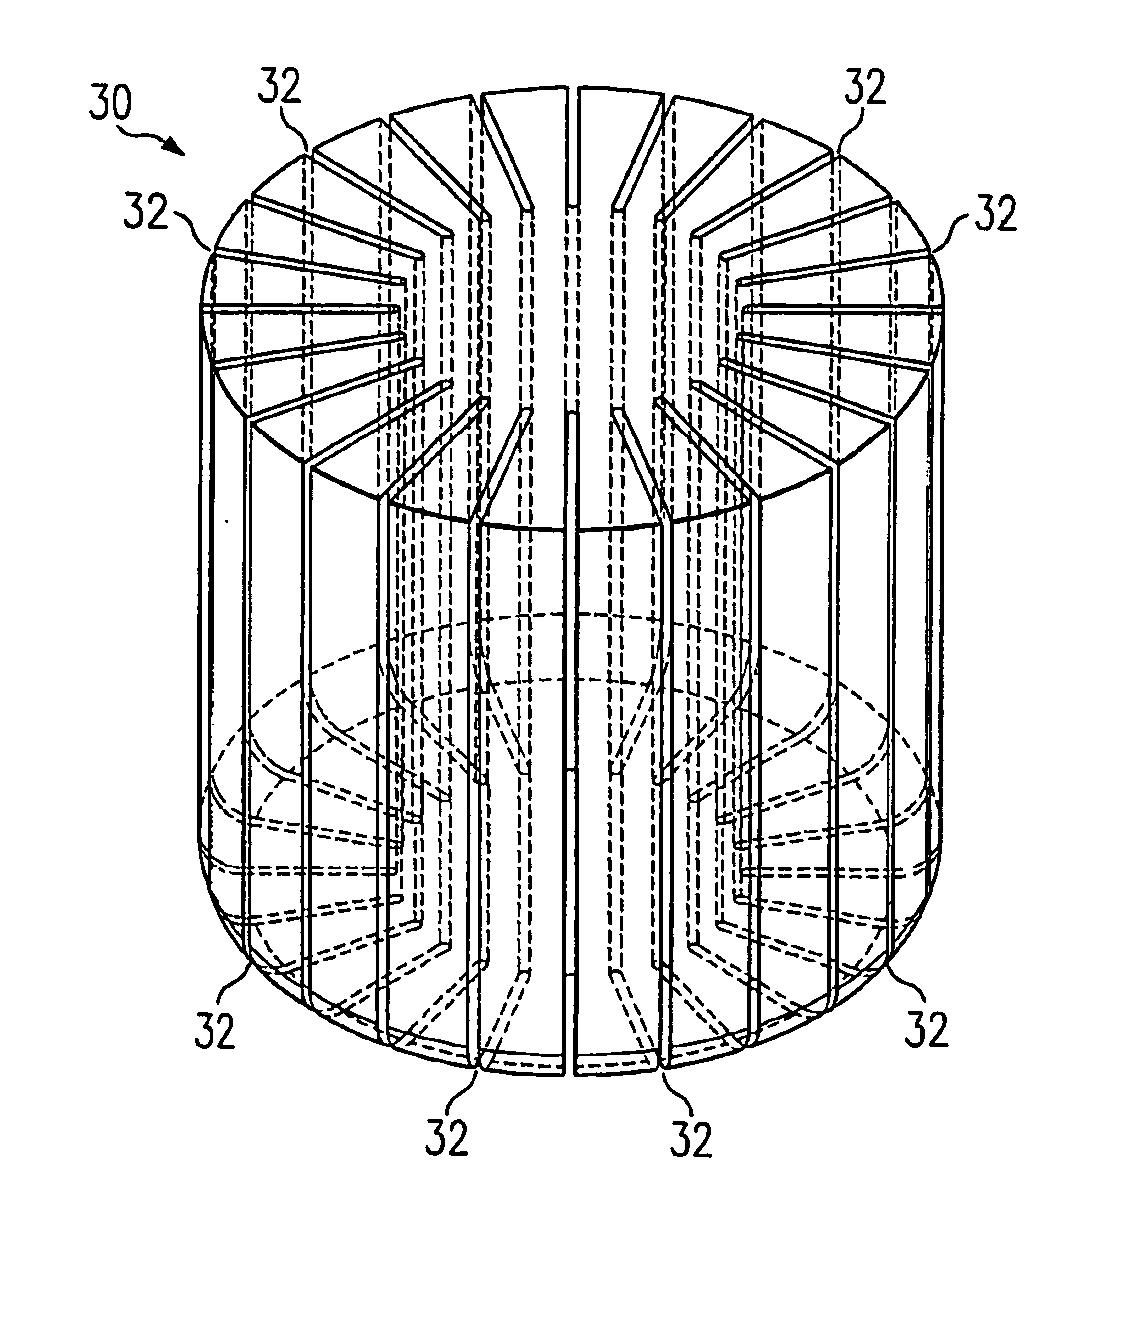 Slotted flow restrictor for a mass flow meter